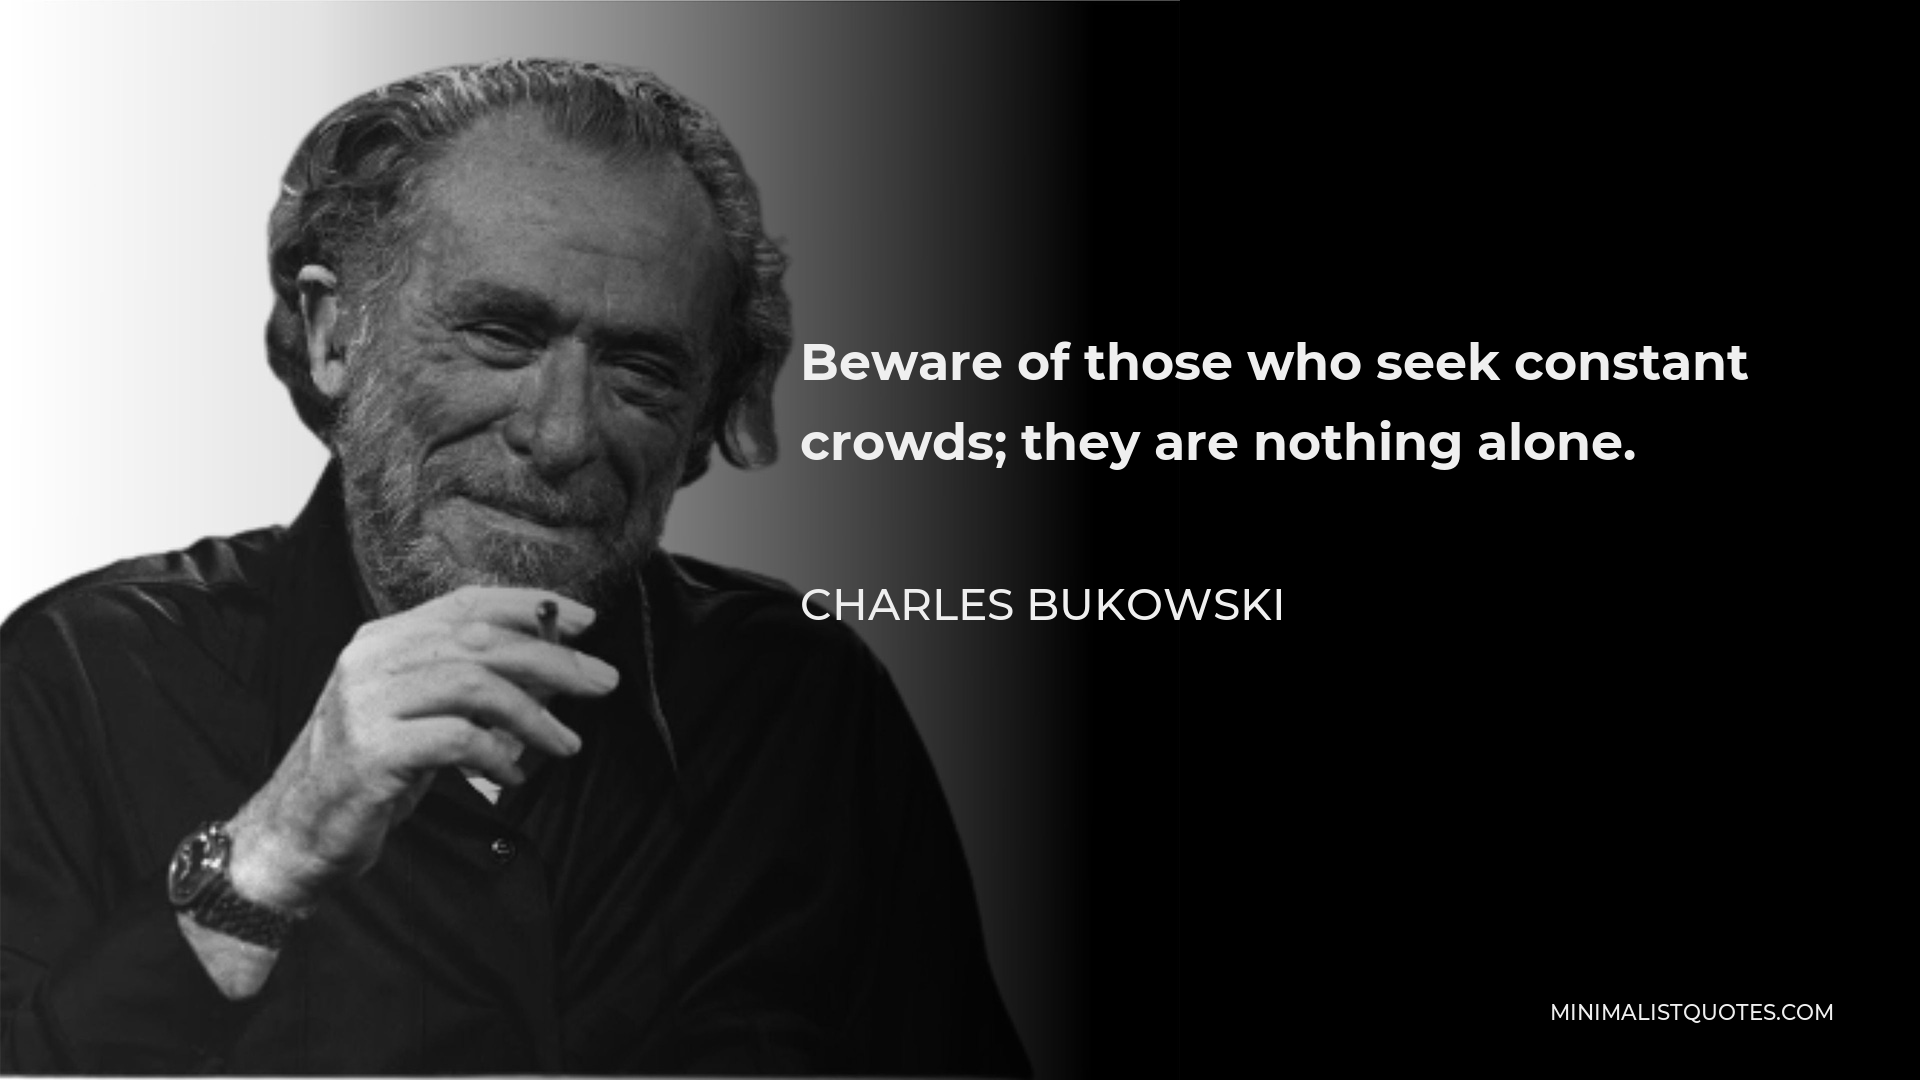 Charles Bukowski Quote - Beware of those who seek constant crowds; they are nothing alone.